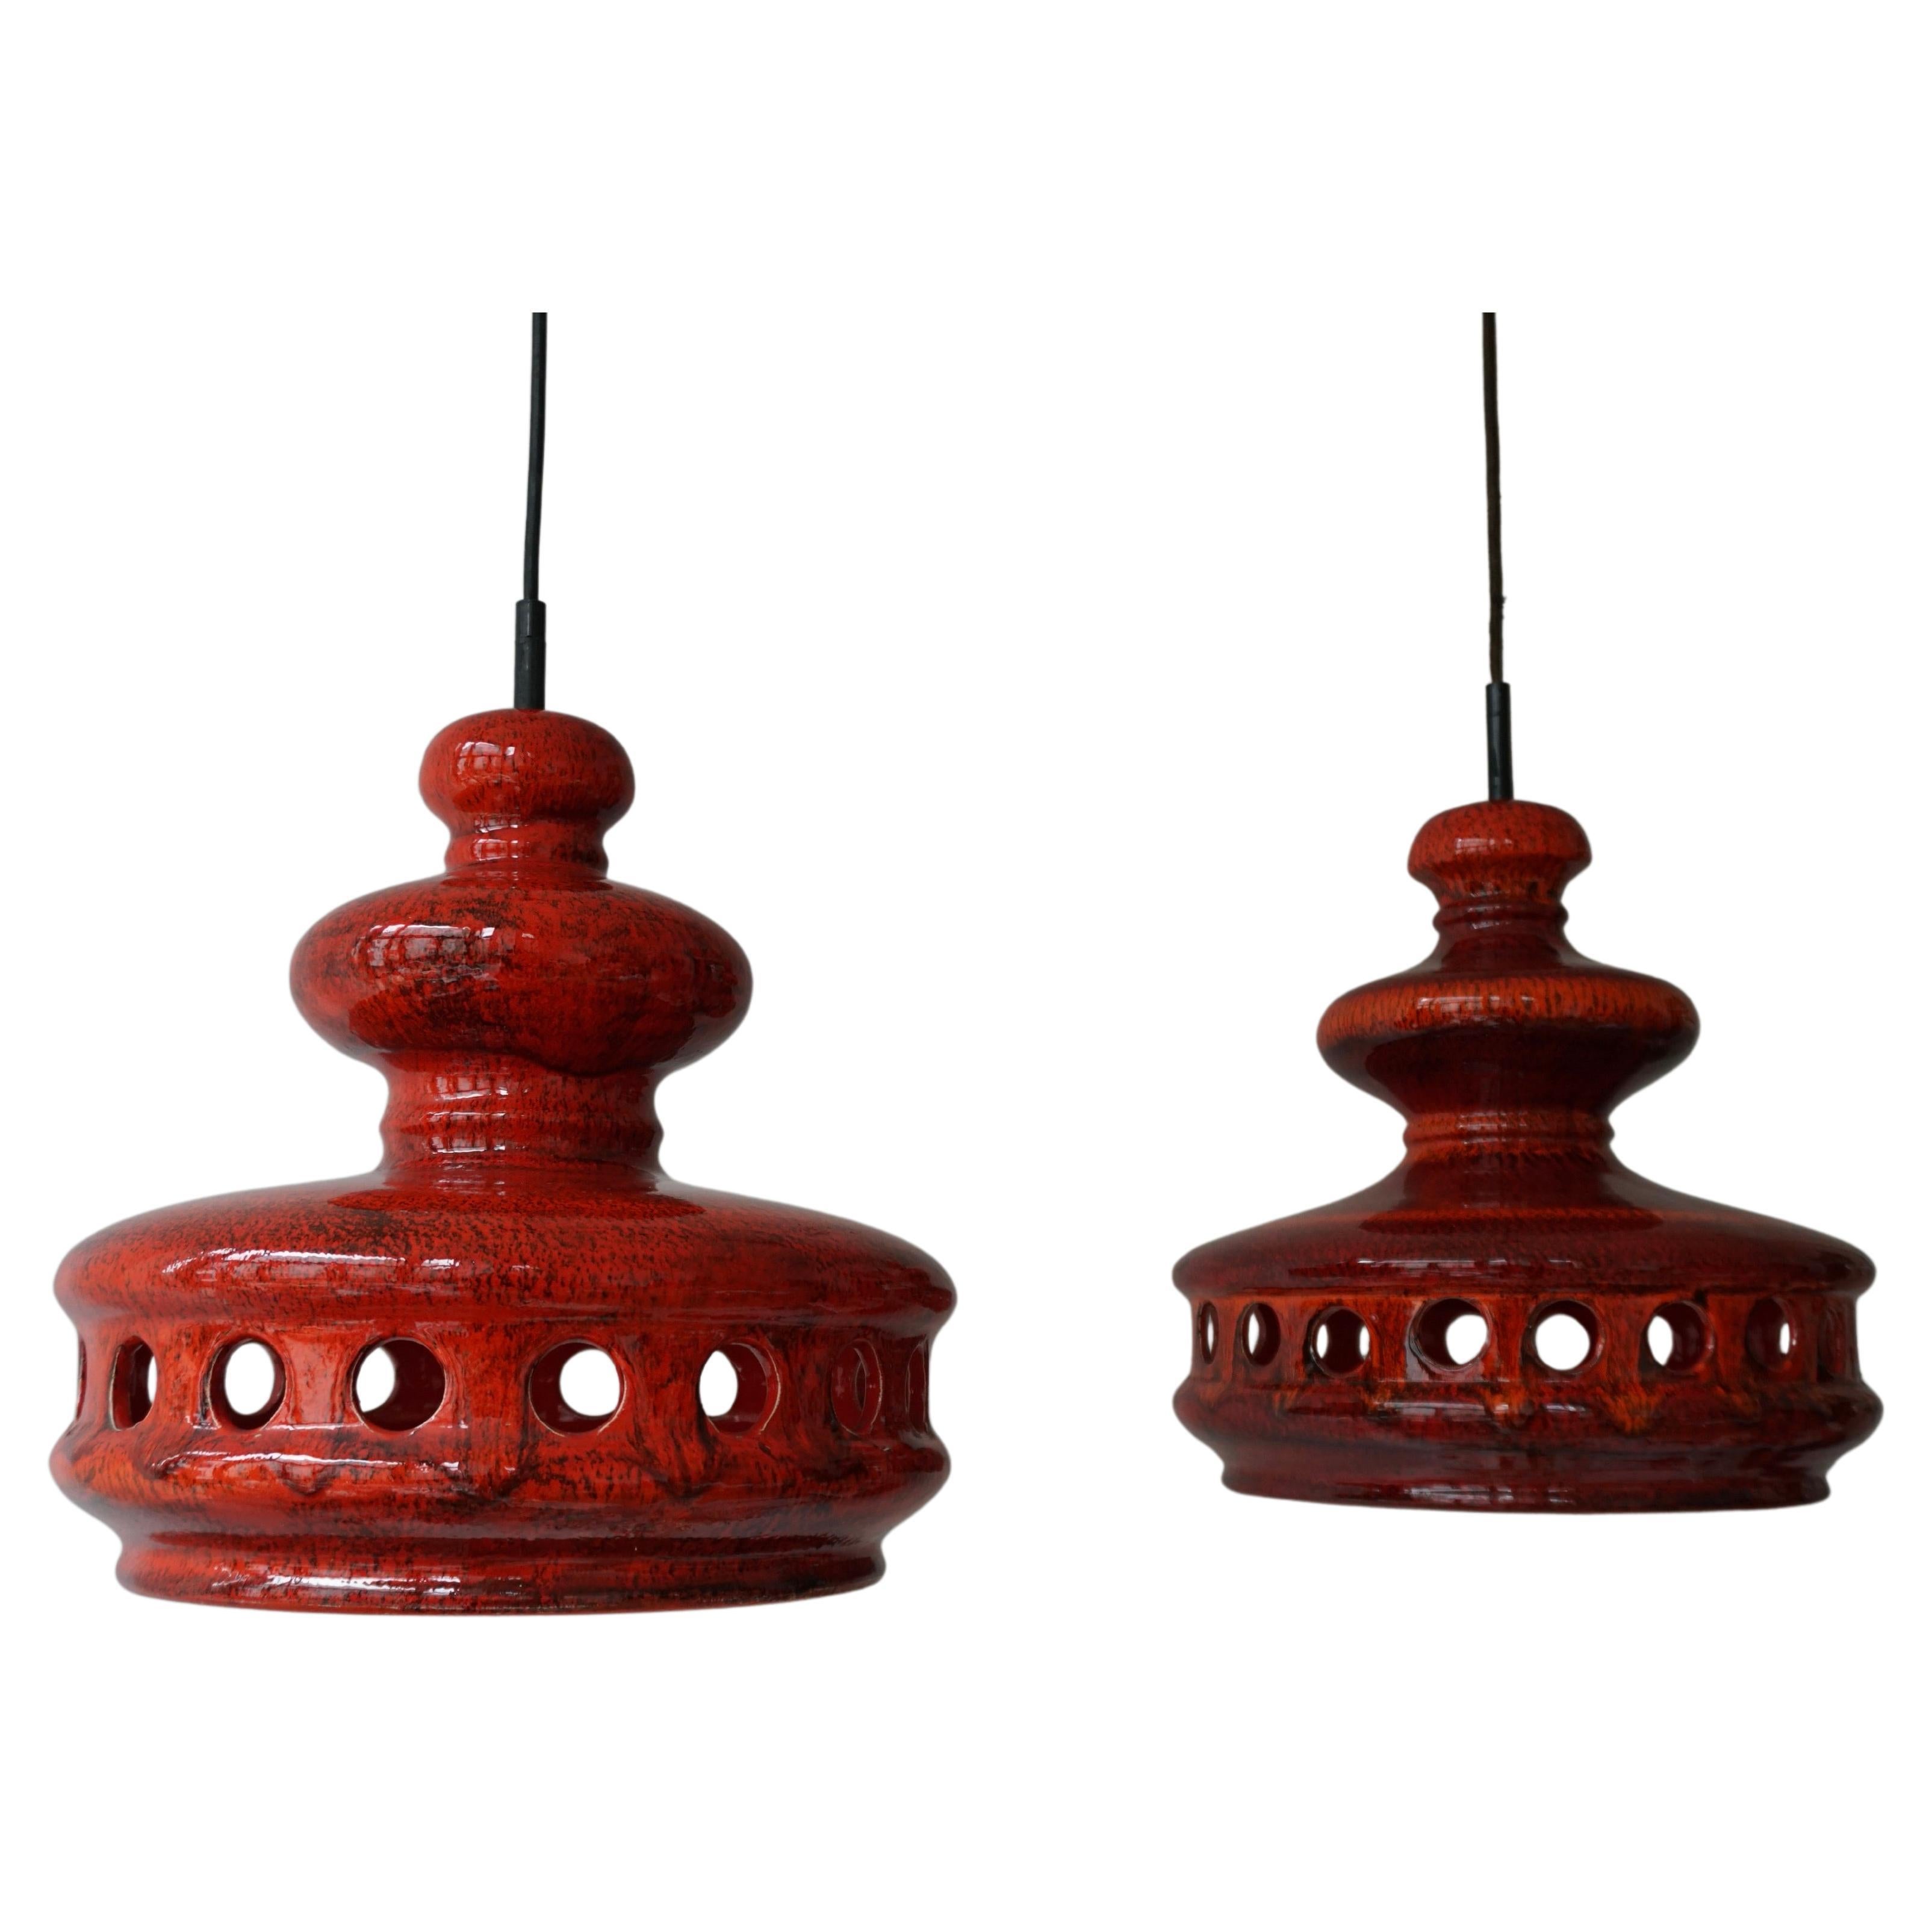  Two Red Fat Lave Ceramic Pendant Light For Sale